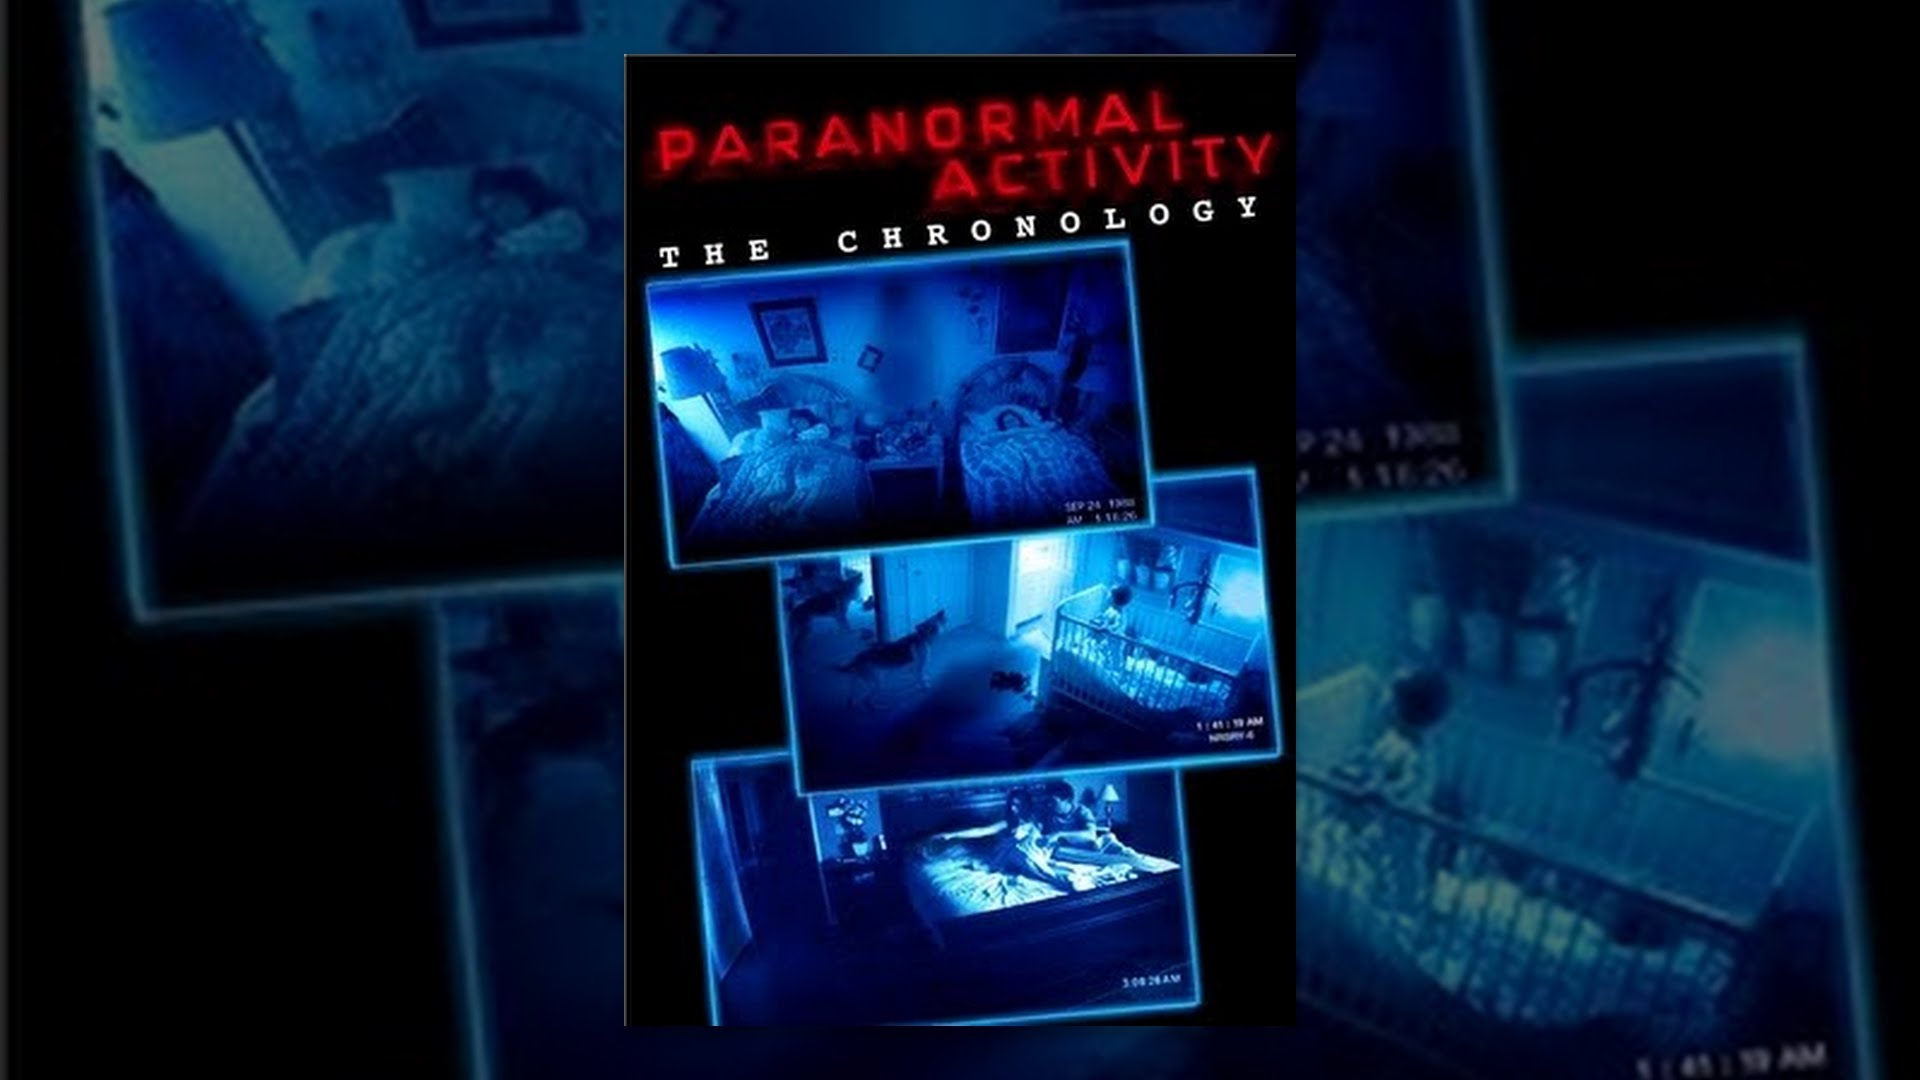 Paranormal Activity The Chronology YouTube